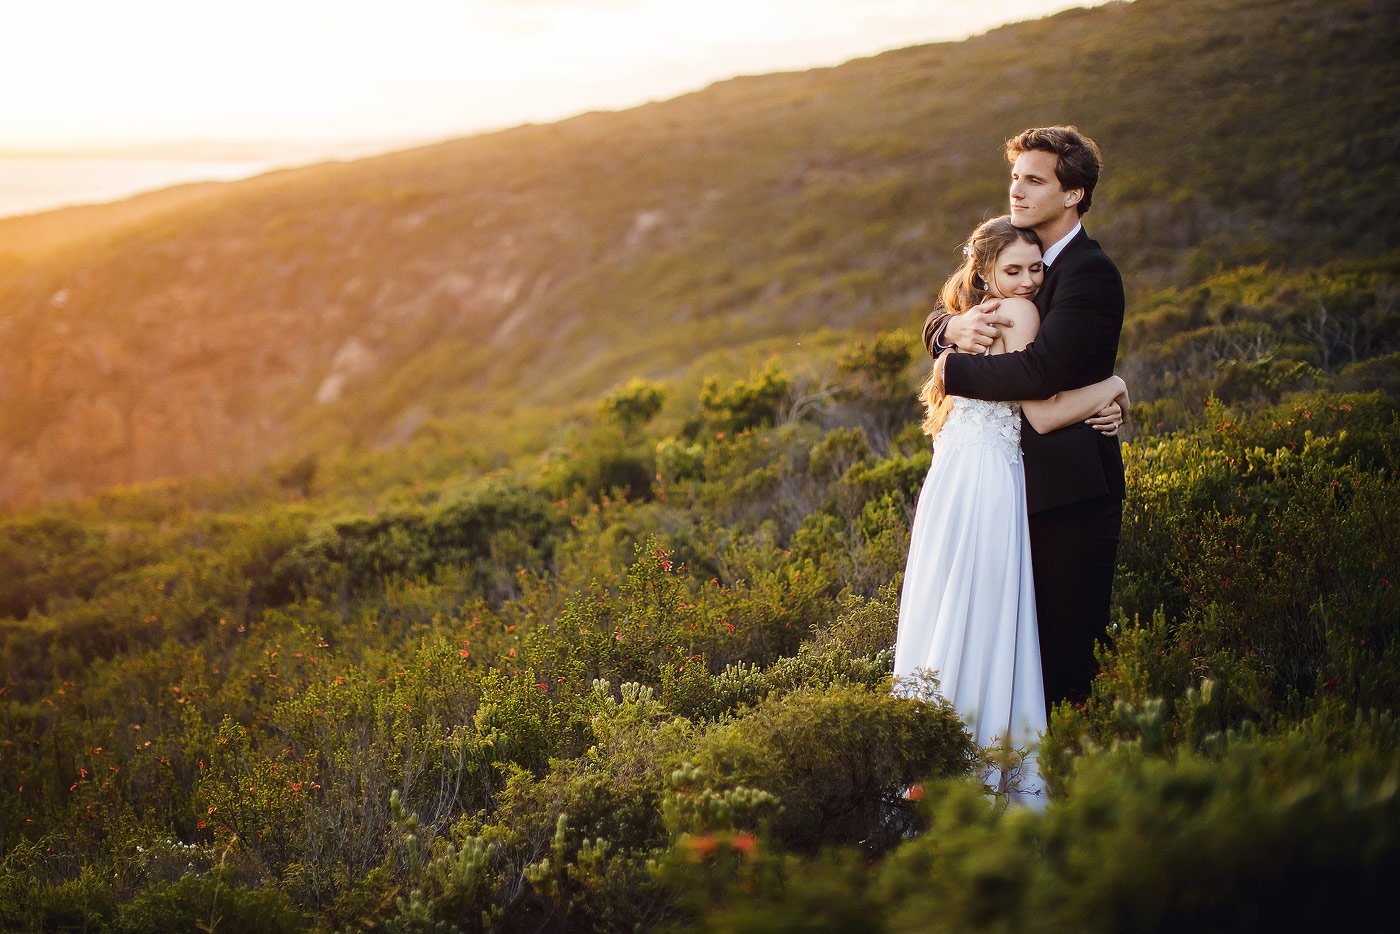  Sunset wedding portraits at the beach in Herold’s Bay with Devon and Jessica after a day of seasonal rain in the Garden Route. 